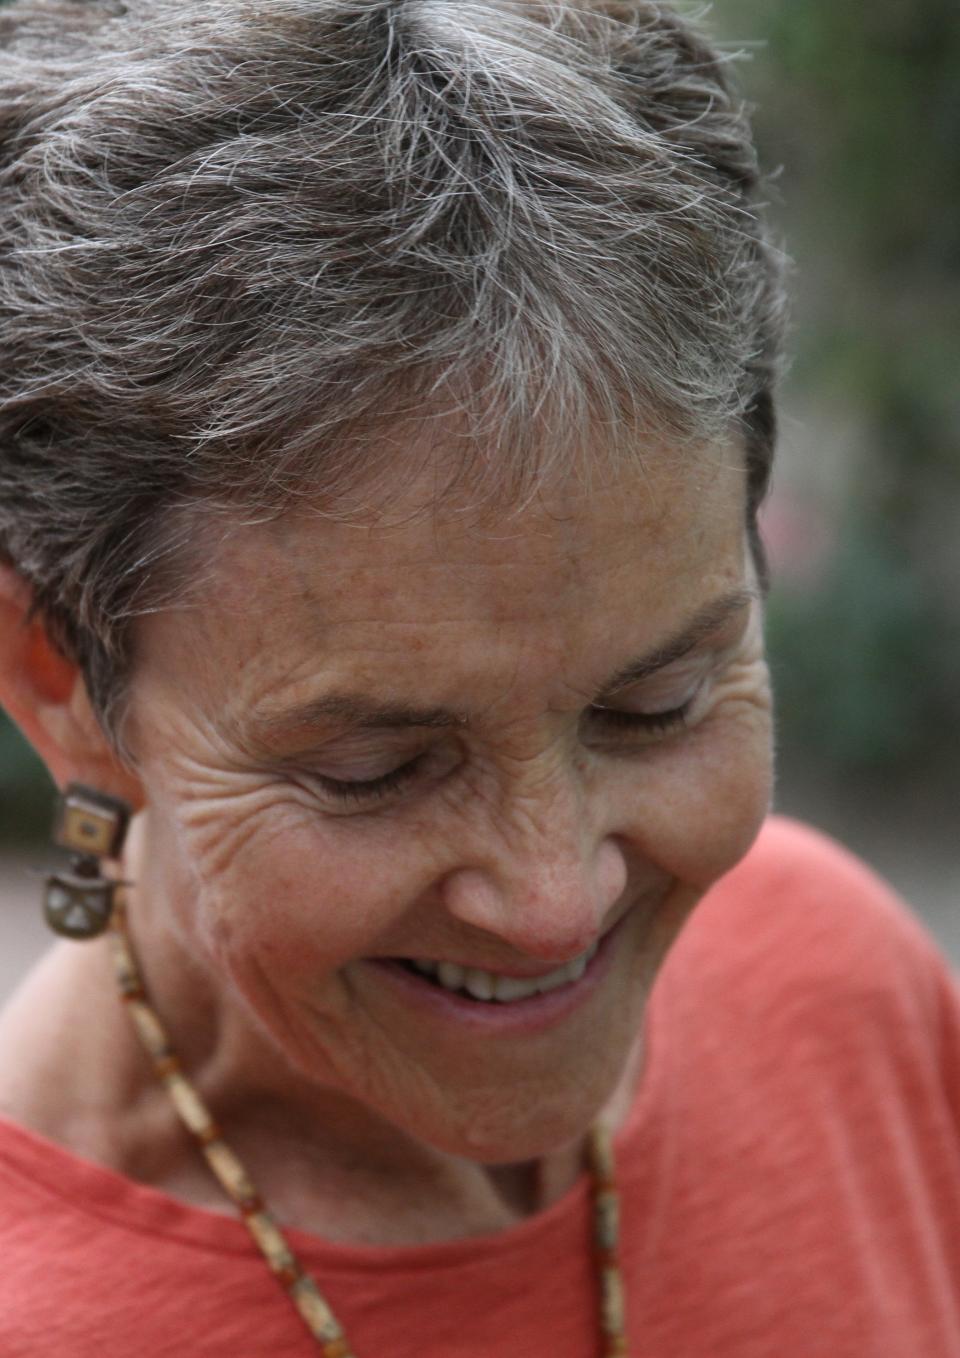 A white woman with short gray hair, smiling, looking down, wearing an orange shirt, a natural colored beaded necklace, and complementary earrings.